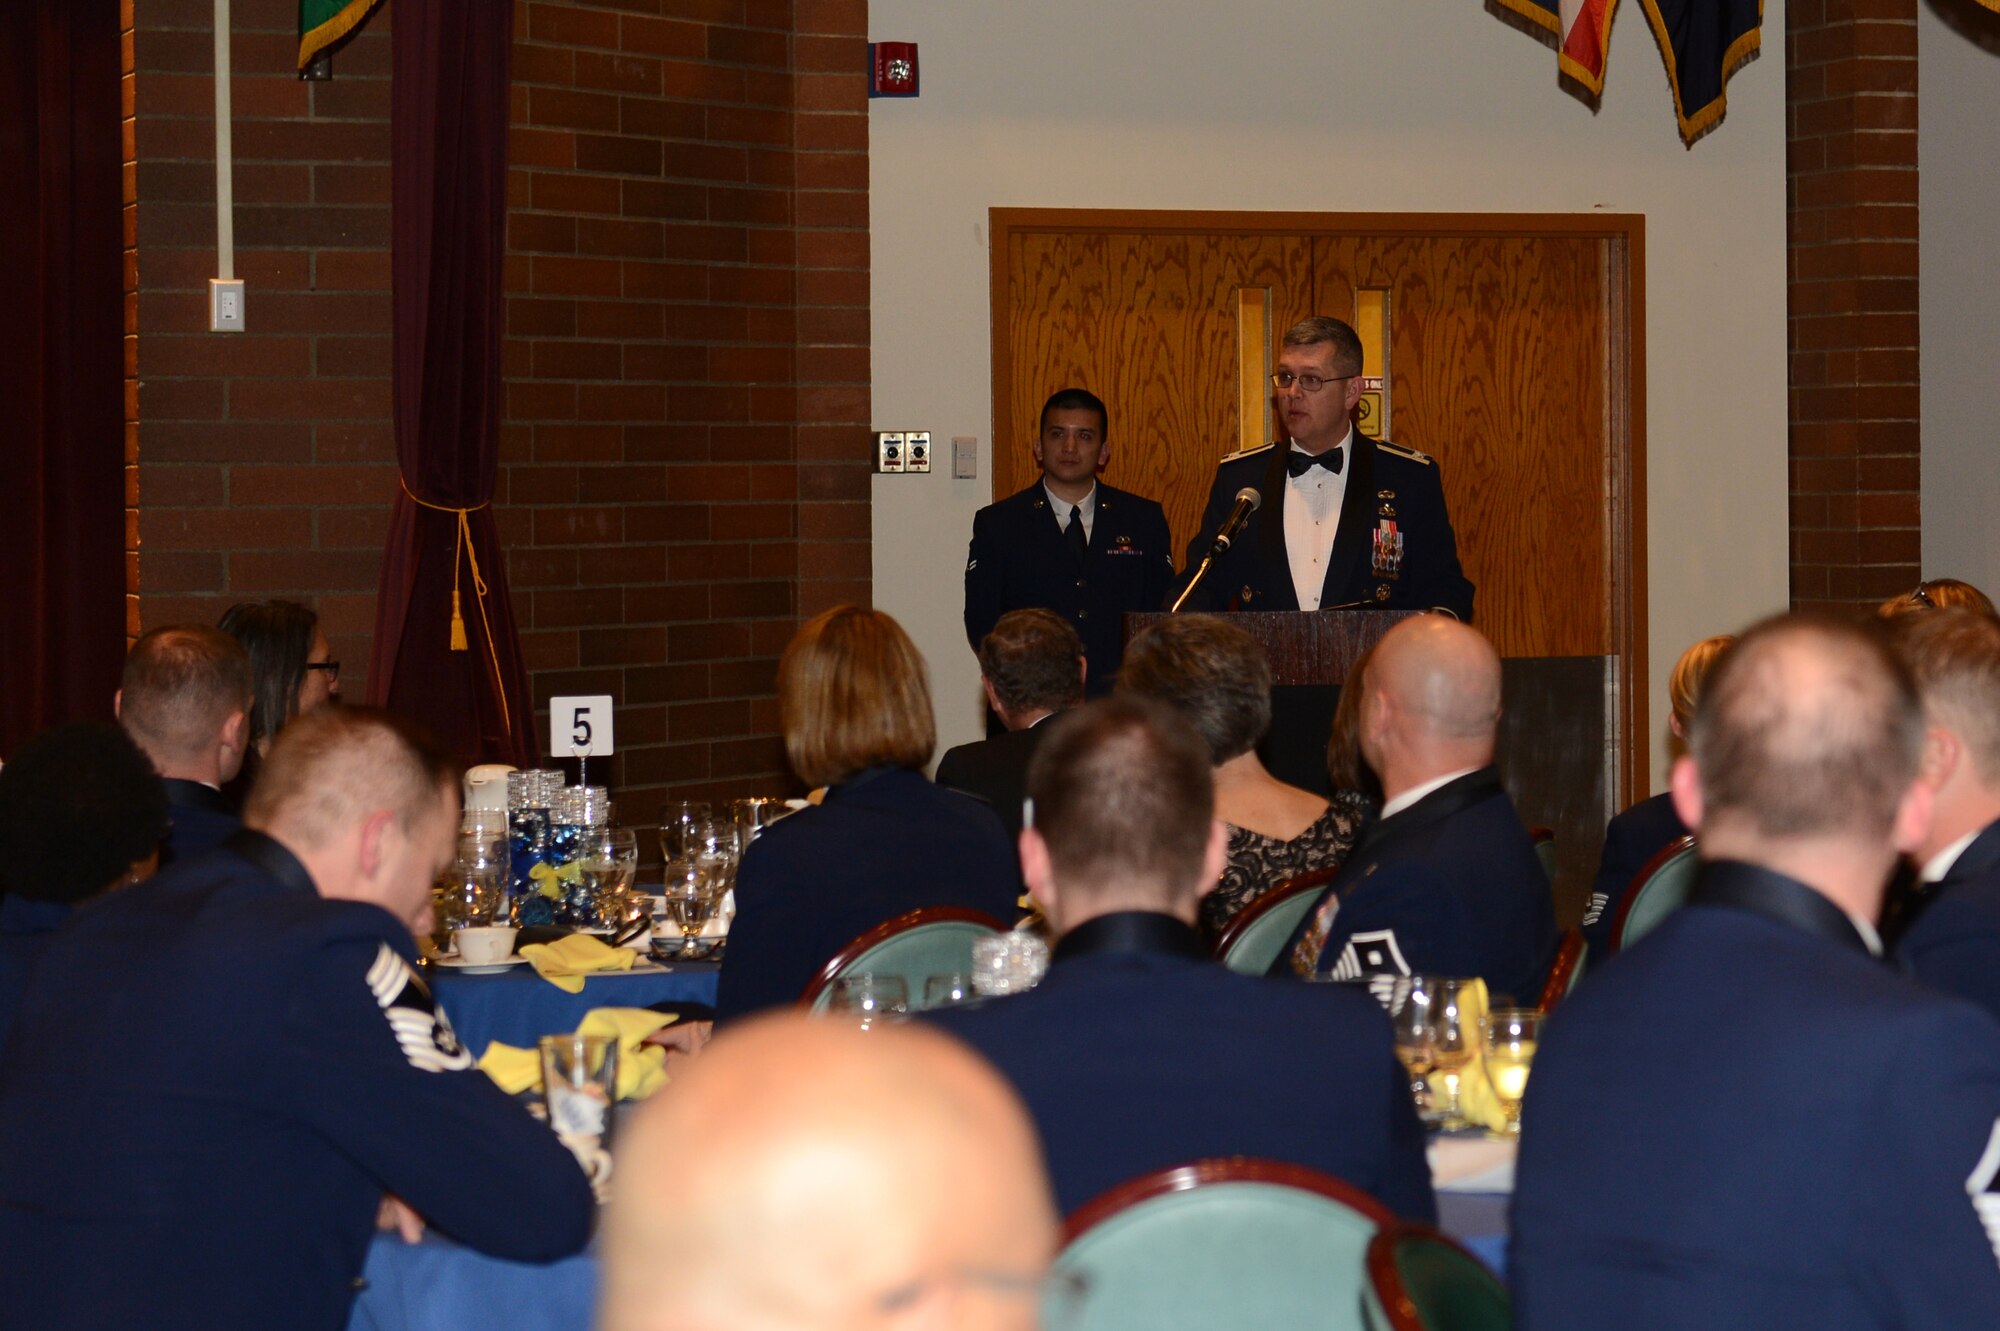 Col Anthony Babcock, 62nd Maintenance Group commander, speaks during the 2017 Team McChord Annual Awards Banquet at the McChord Field Club, Joint Base Lewis-McChord, Wash., Feb. 23, 2018. Babcock was the guest speaker at the awards banquet.